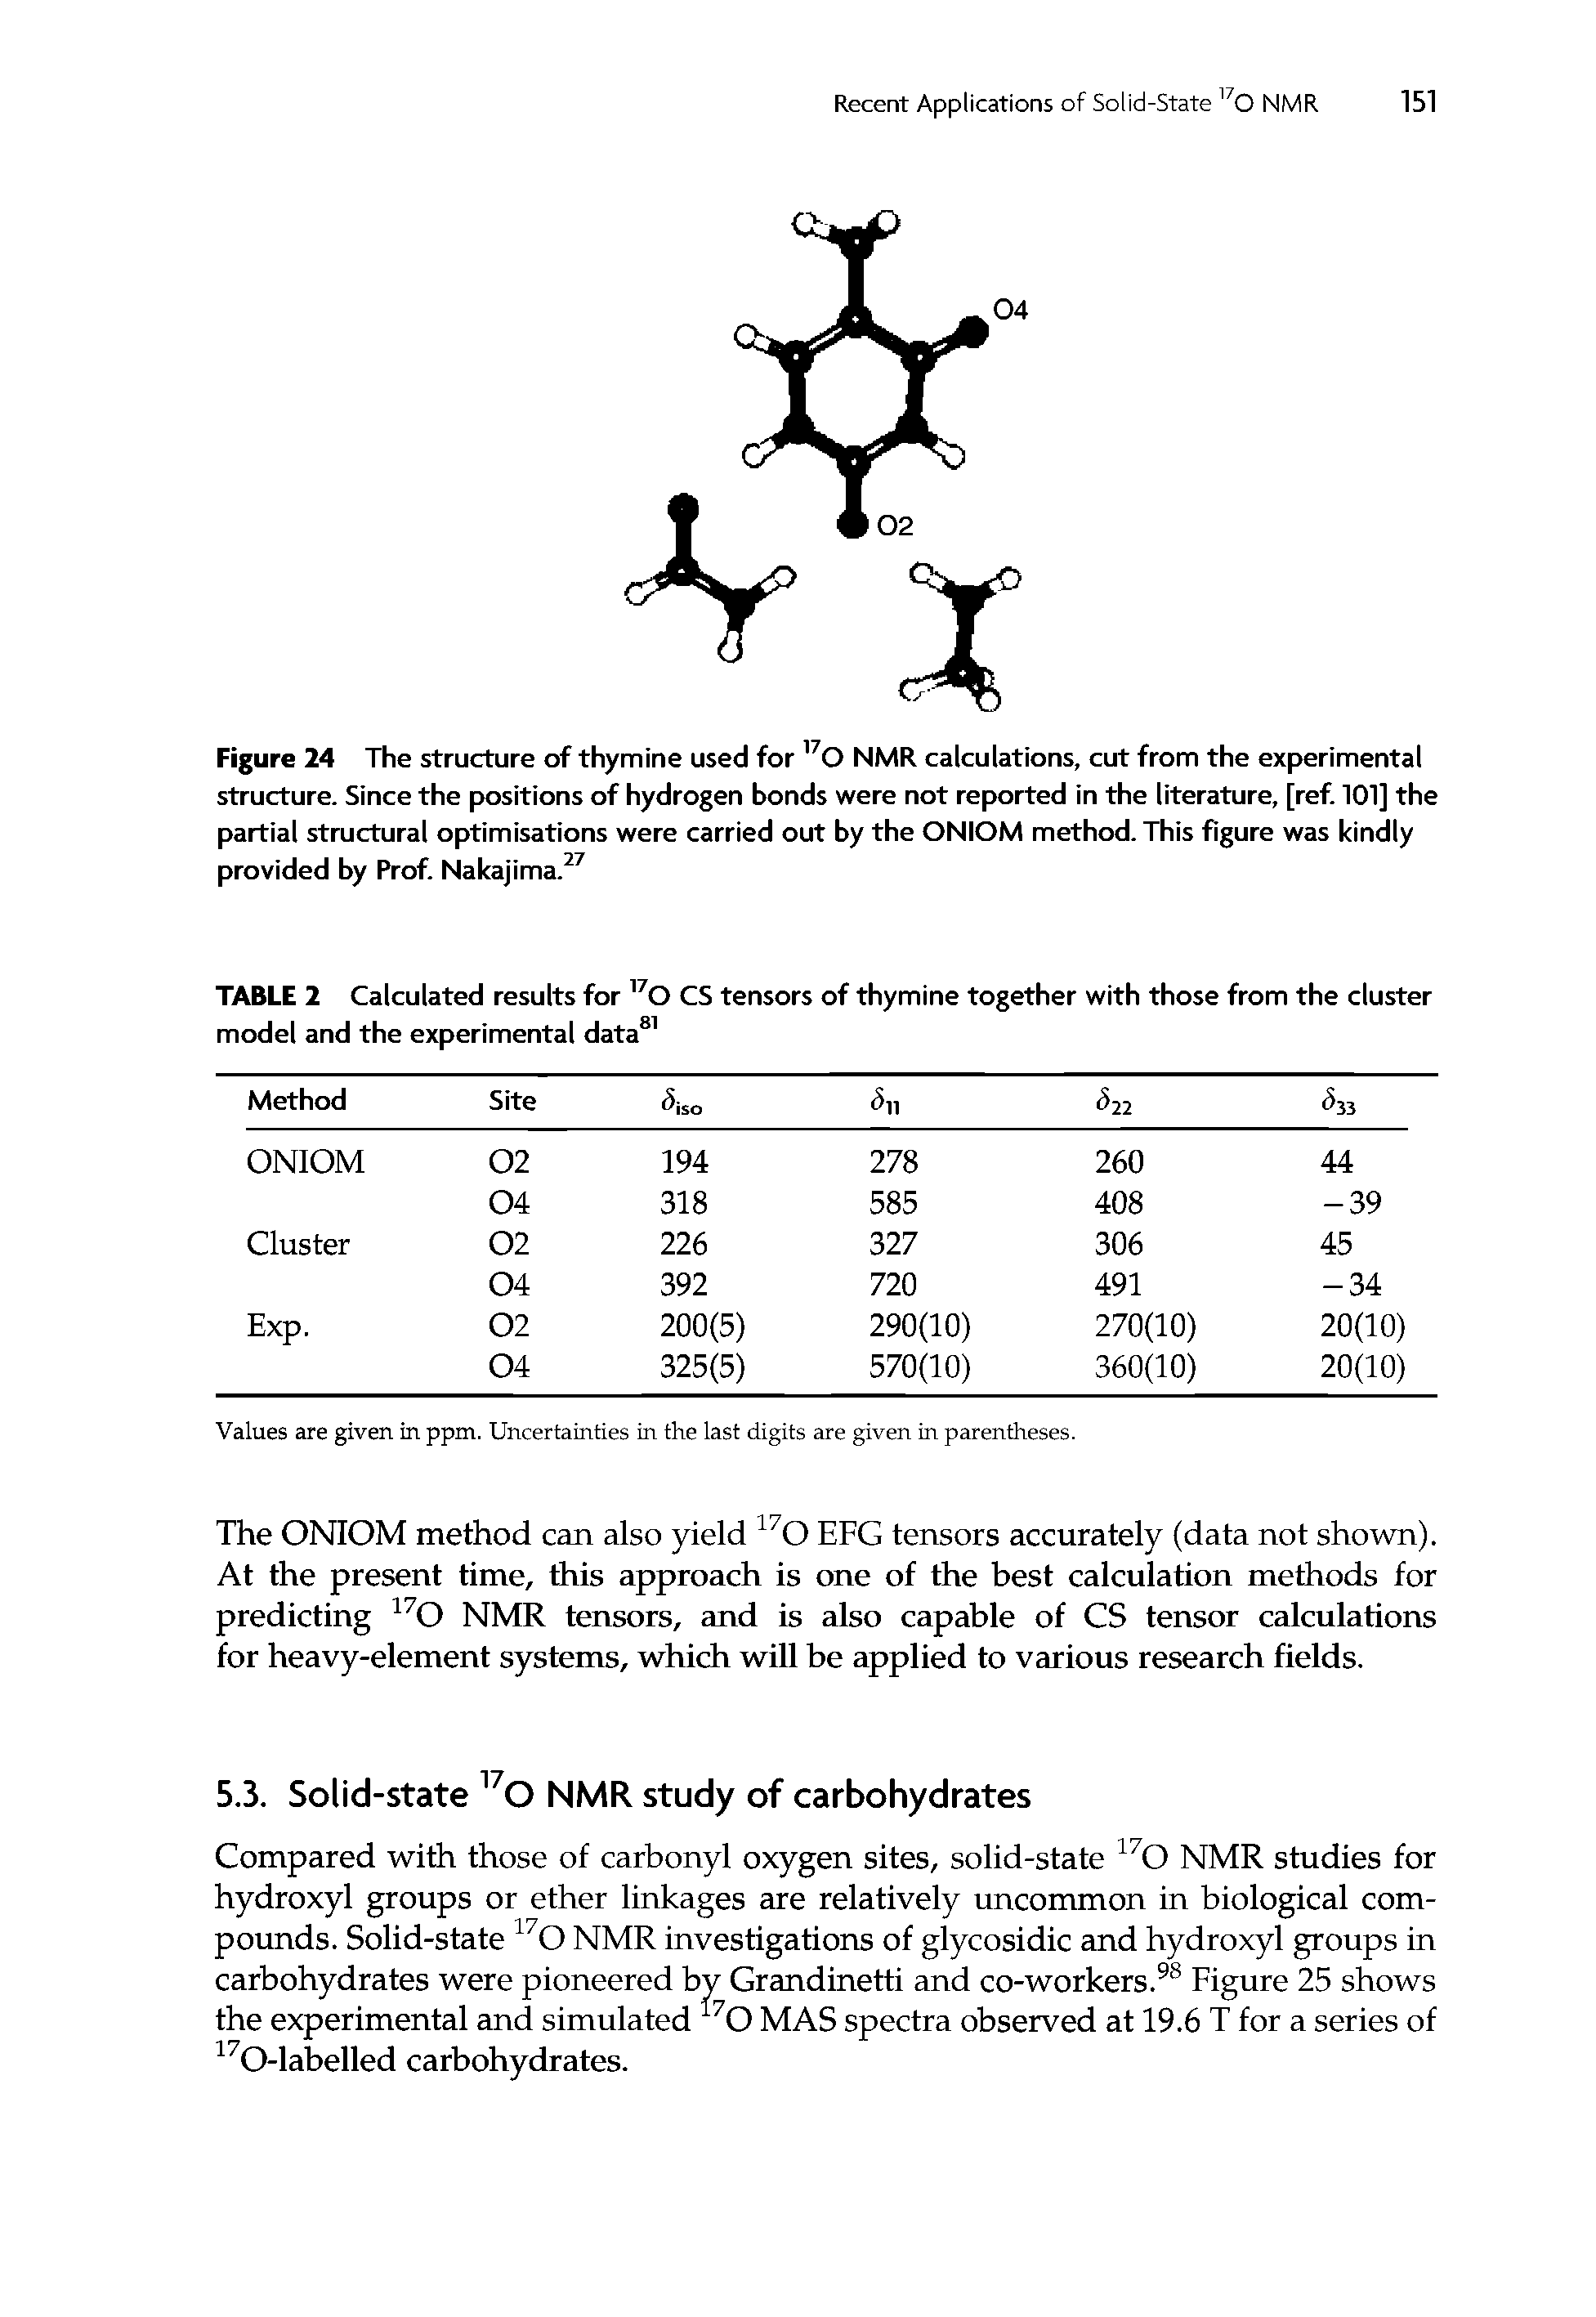 Figure 24 The structure of thymine used for 170 NMR calculations, cut from the experimental structure. Since the positions of hydrogen bonds were not reported in the literature, [ref. 101] the partial structural optimisations were carried out by the ONIOM method. This figure was kindly provided by Prof. Nakajima.27...